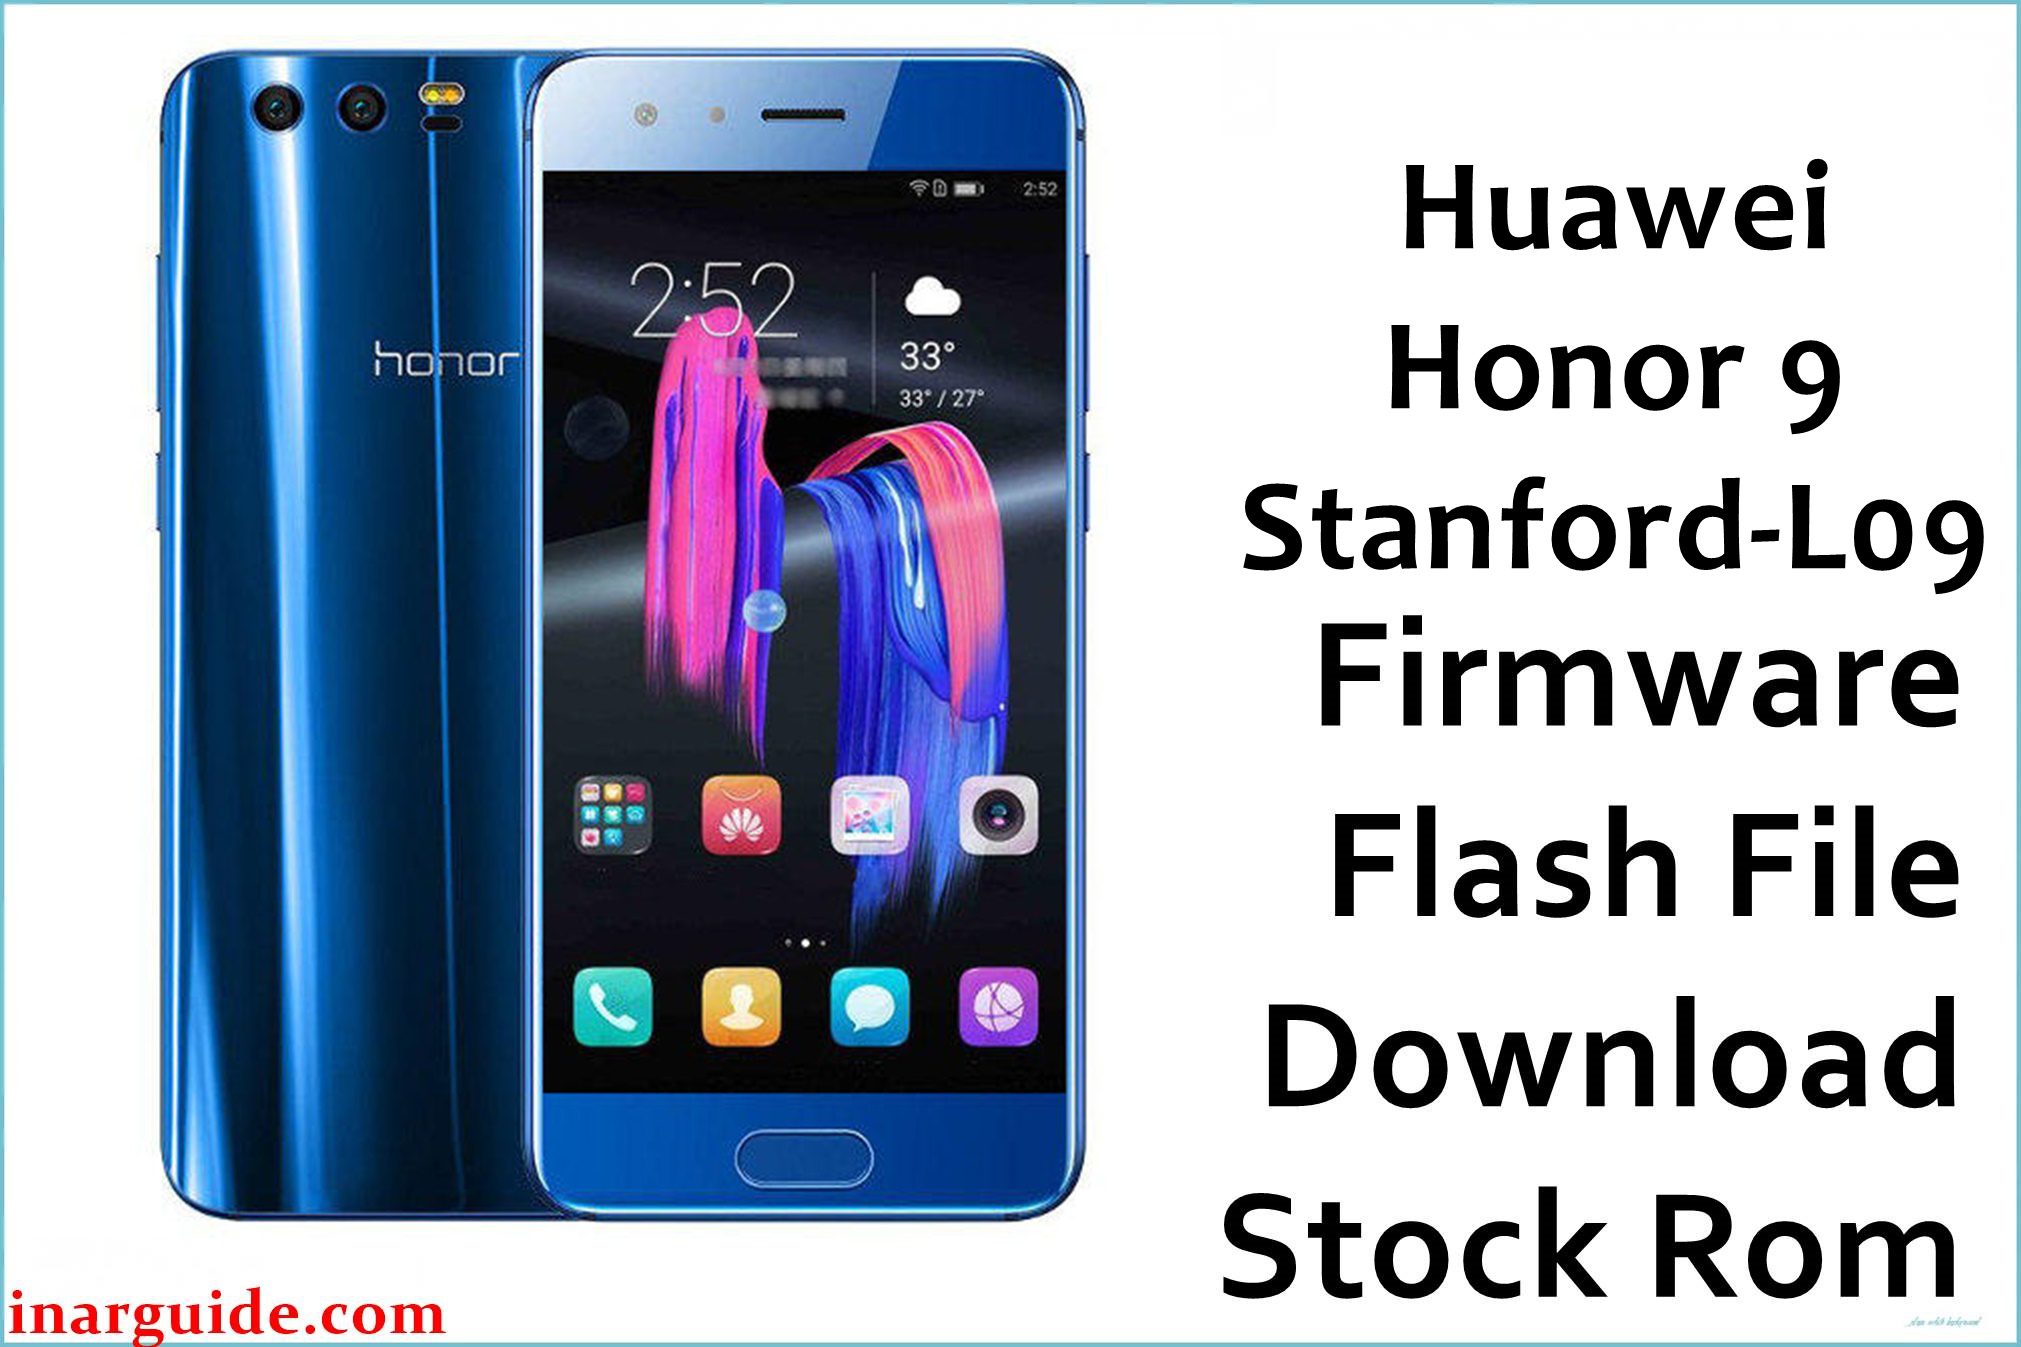 Huawei Honor 9 Stanford L09